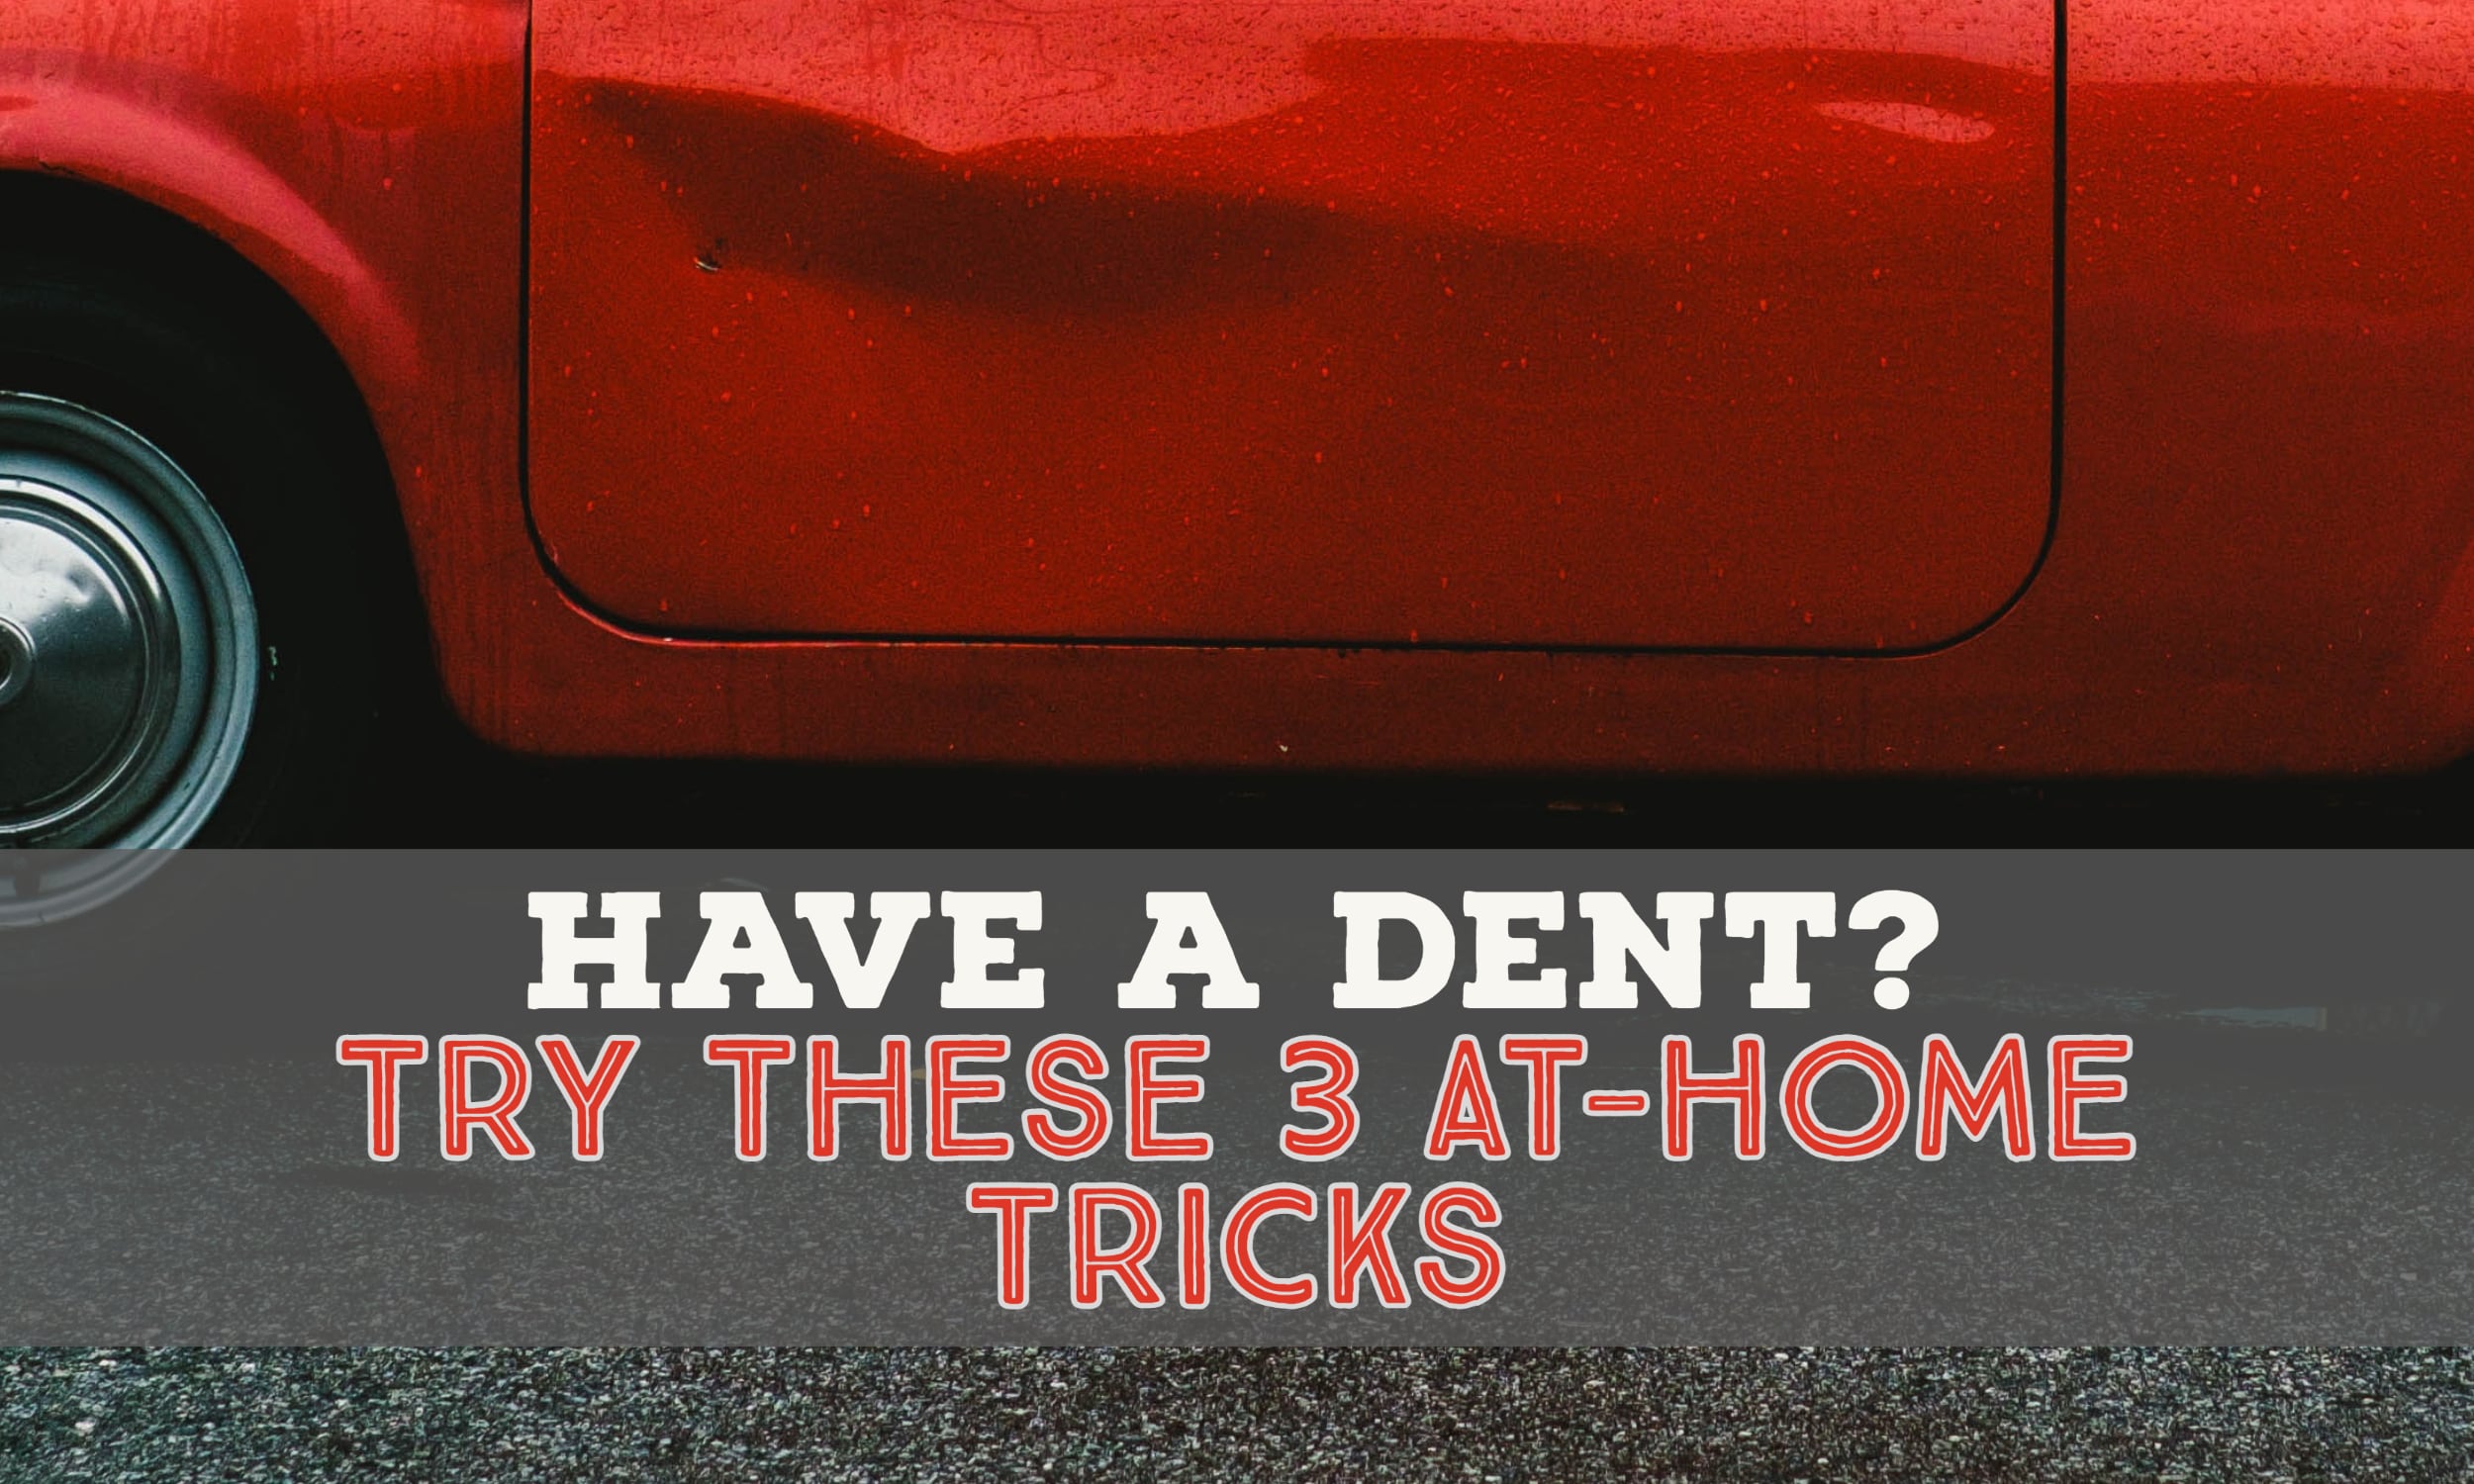 Dented Red Car Door with Words at bottom that say "Have A Dent? Try these 3 at-home tricks"